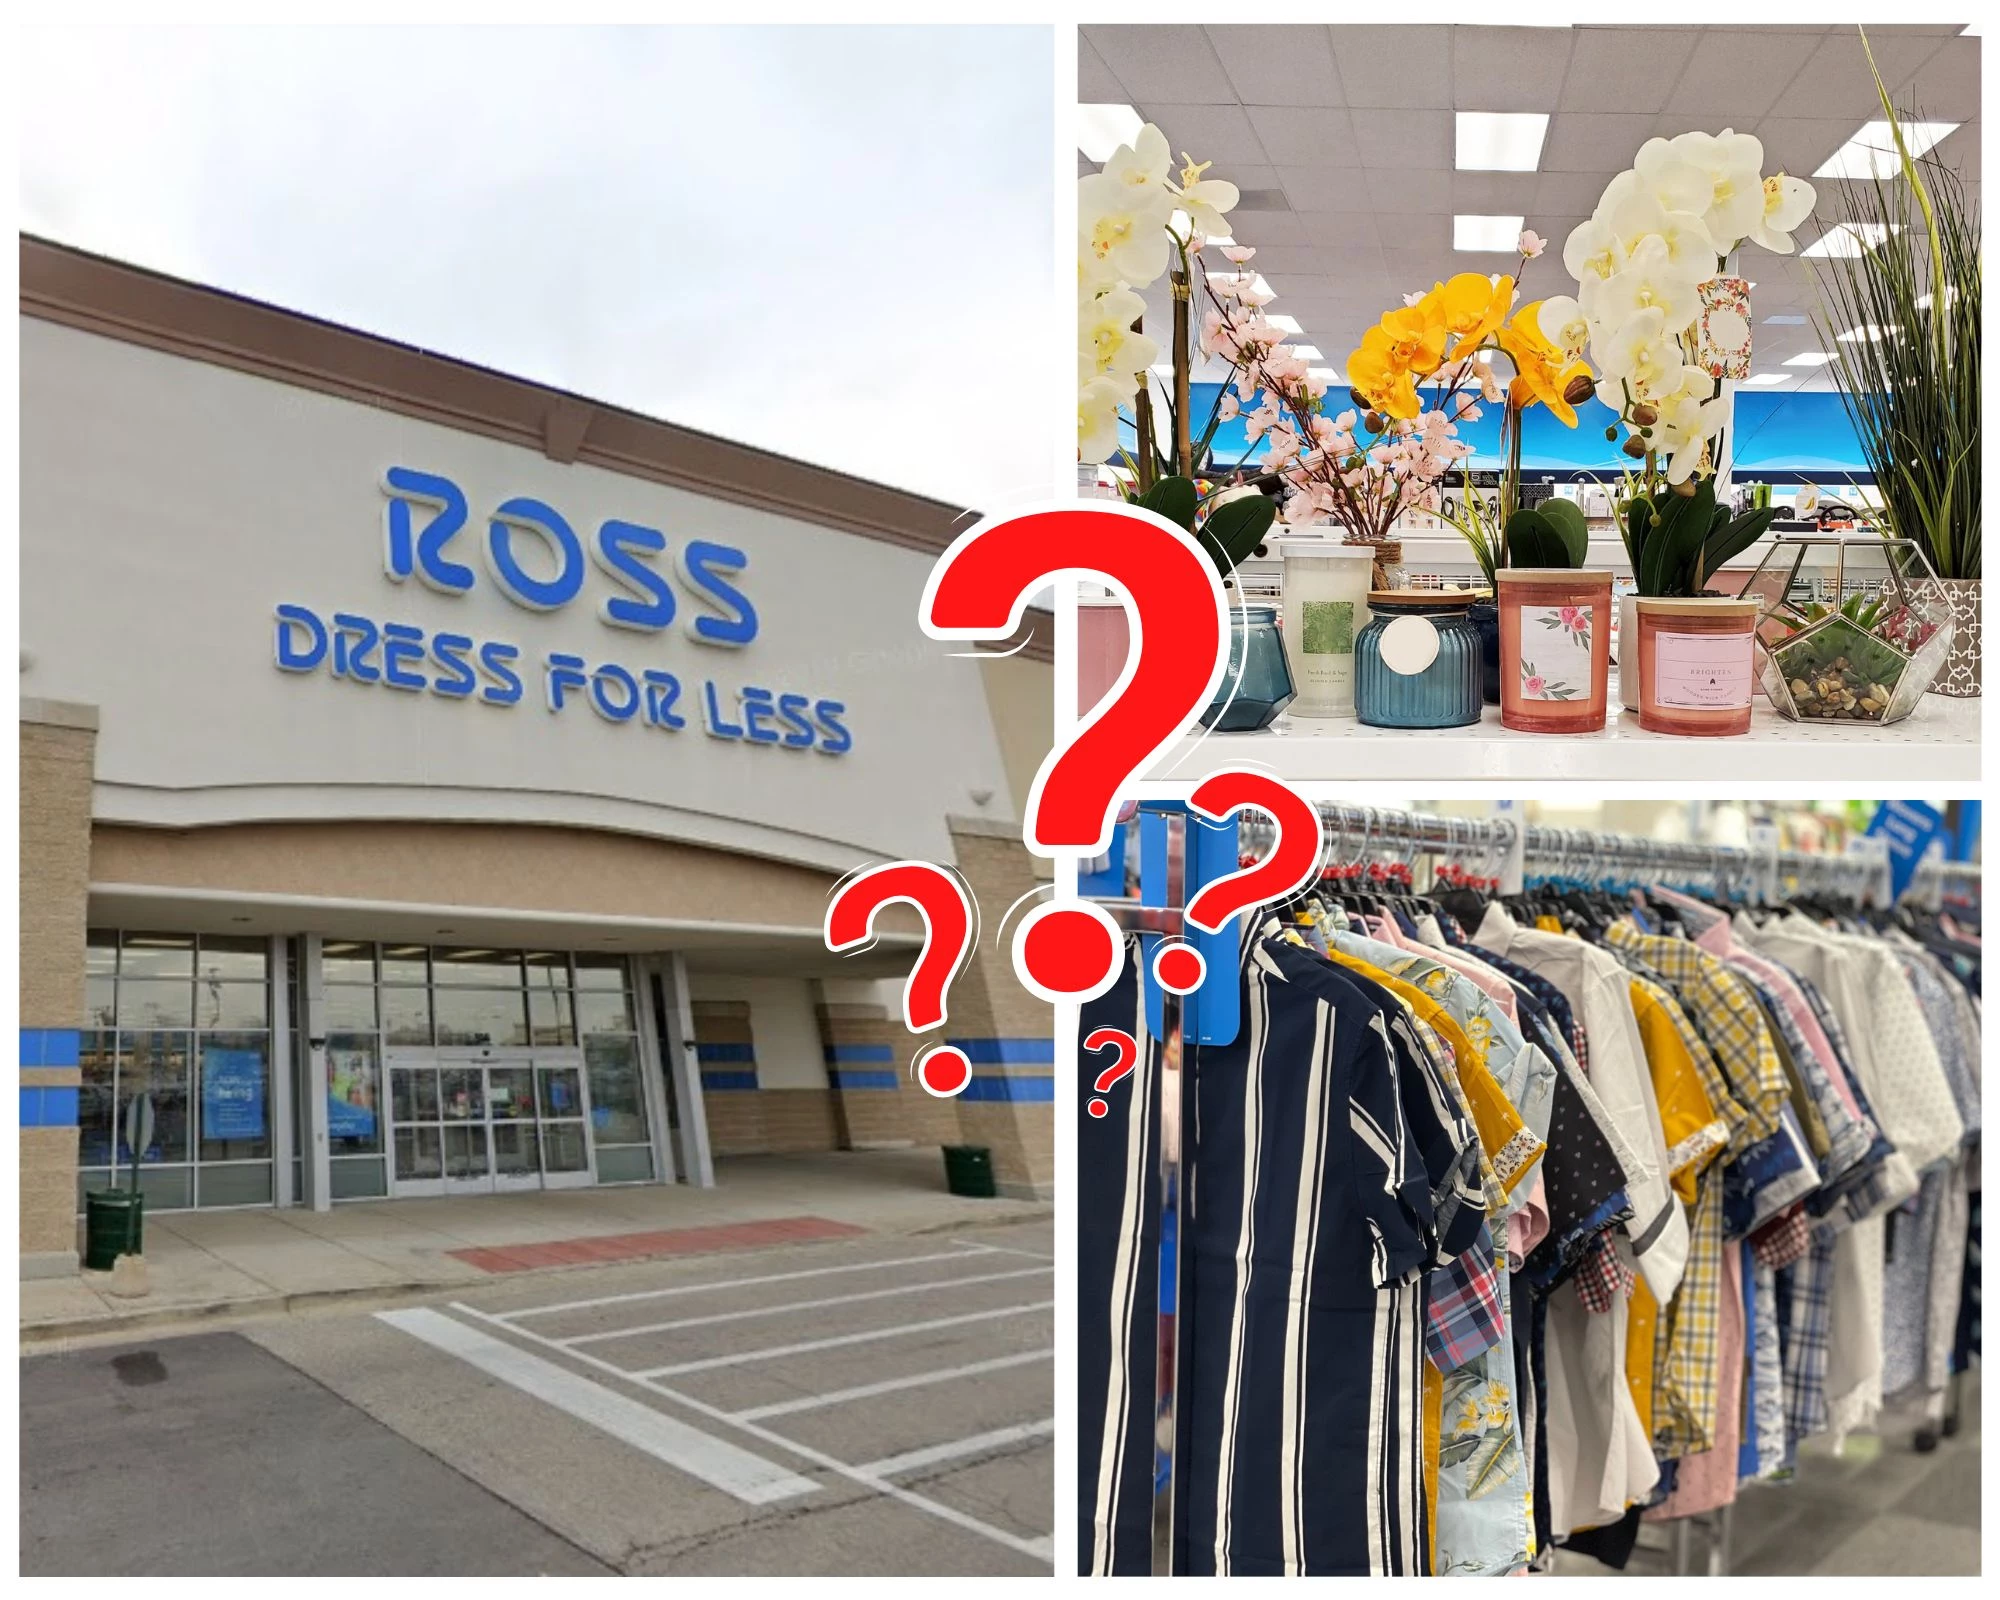 Ross Dress for Less Stores Could be Opening in Grand Rapids